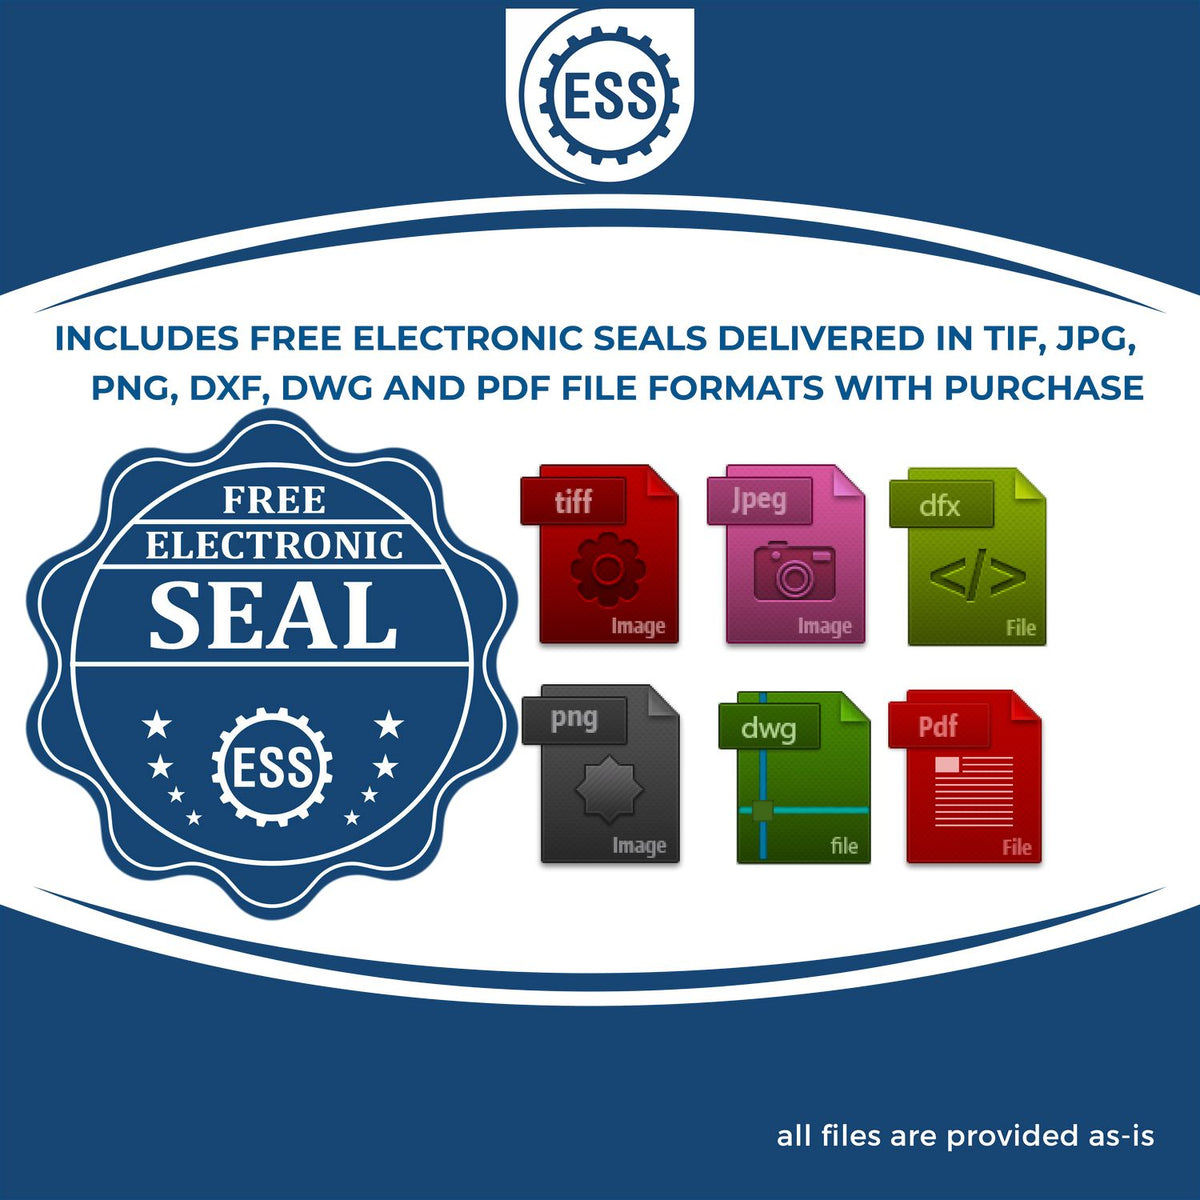 An infographic for the free electronic seal for the Long Reach Delaware Land Surveyor Seal illustrating the different file type icons such as DXF, DWG, TIF, JPG and PNG.